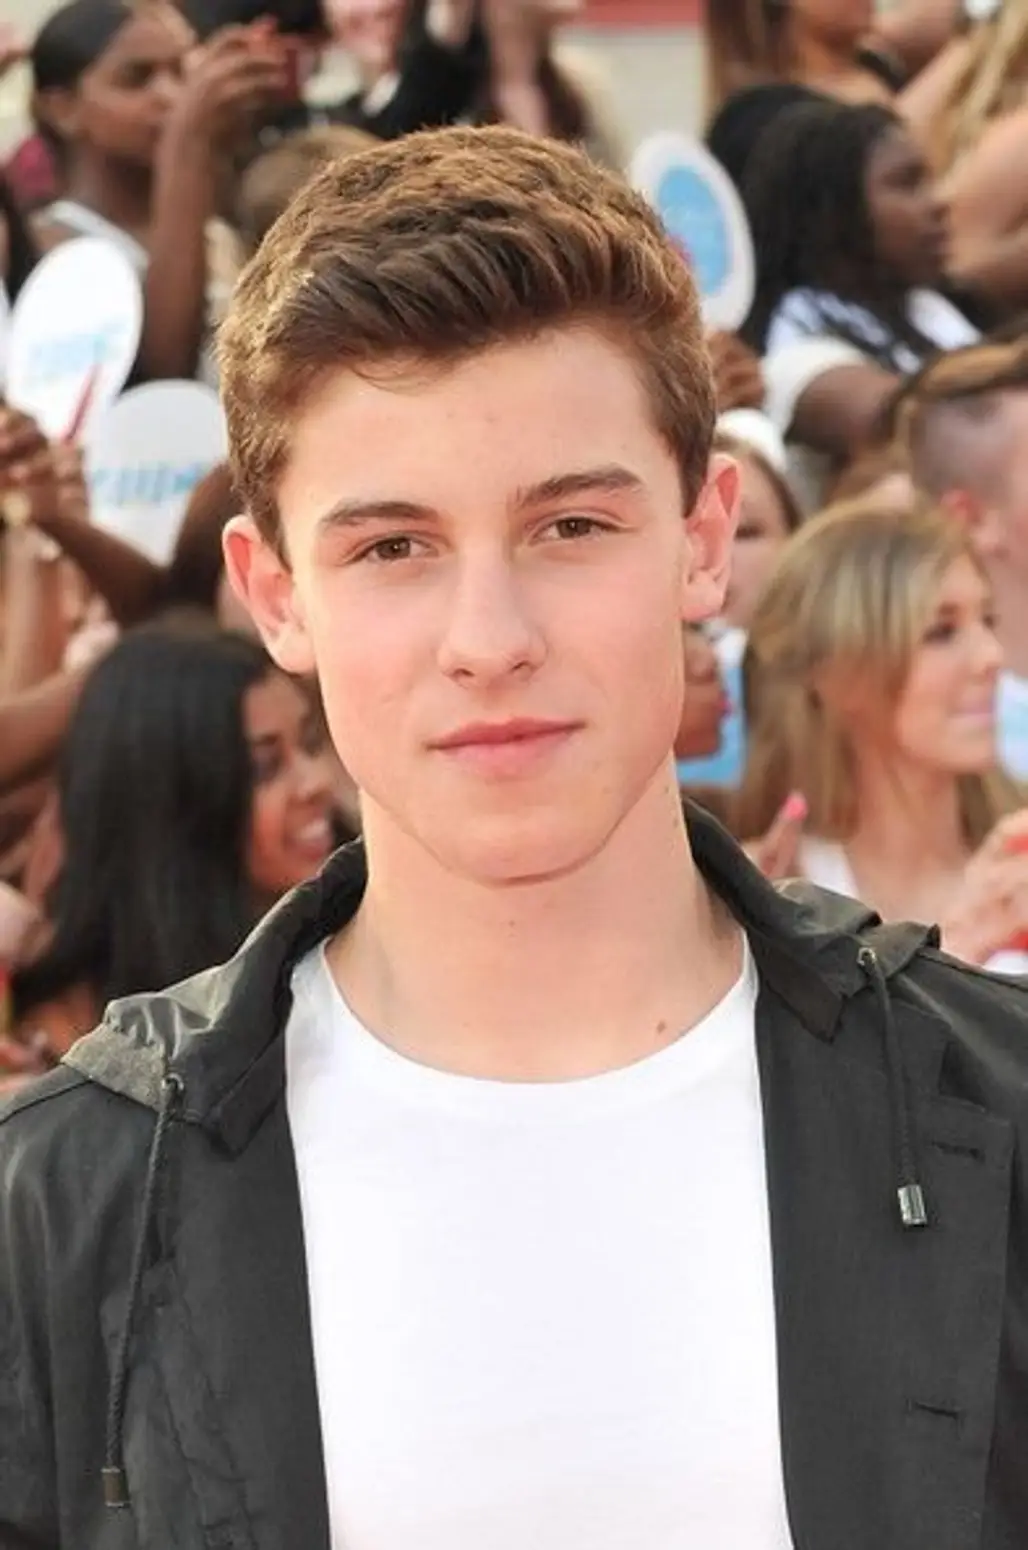 Shawn Mendes, 16